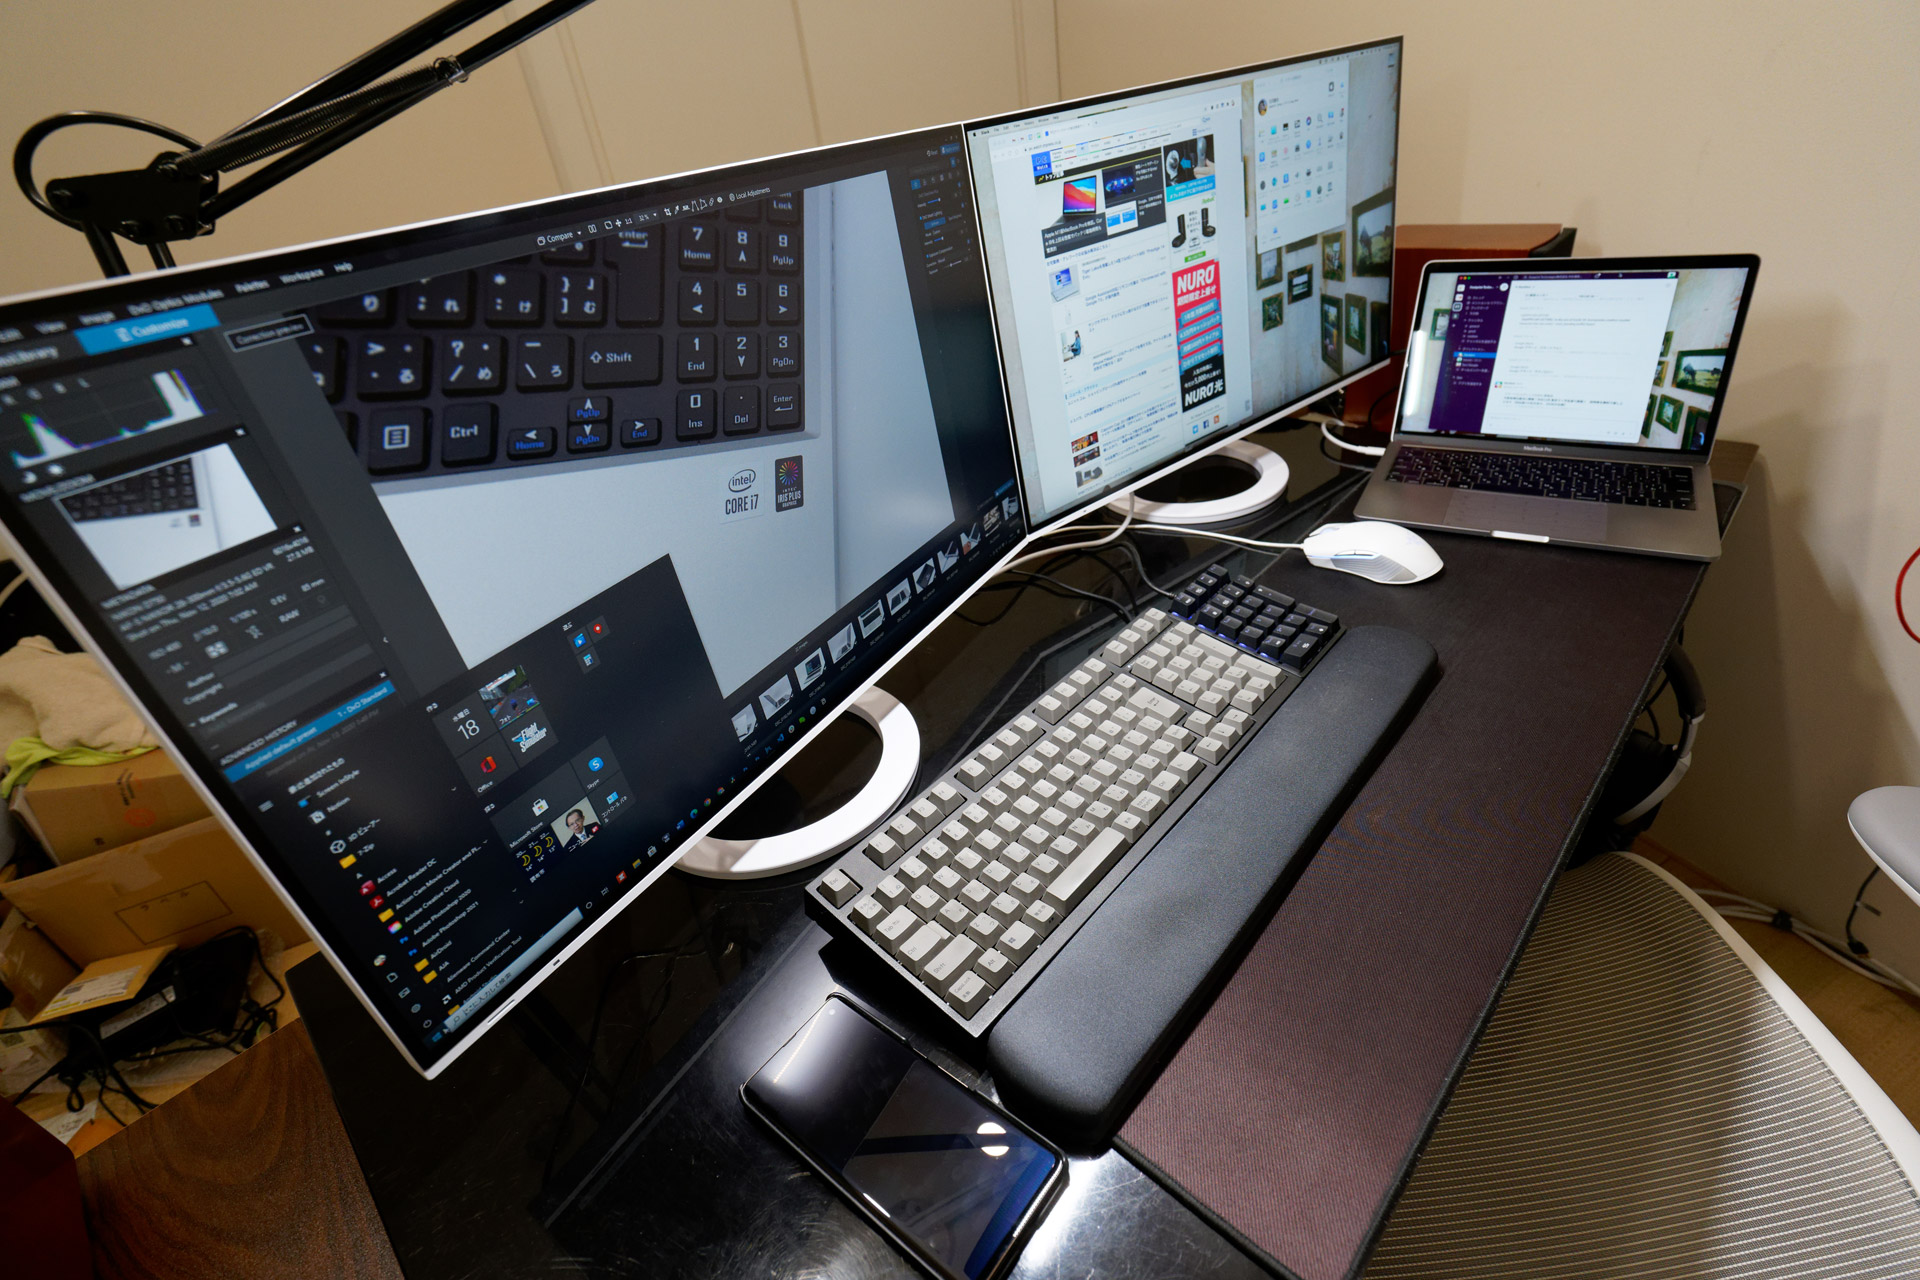 I can also display the screen from the monitor on the left, which is connected to my desktop PCs, on my MacBook and operate them simultaneously. I use the MacBook Pro's keyboard and trackpad when I do this.